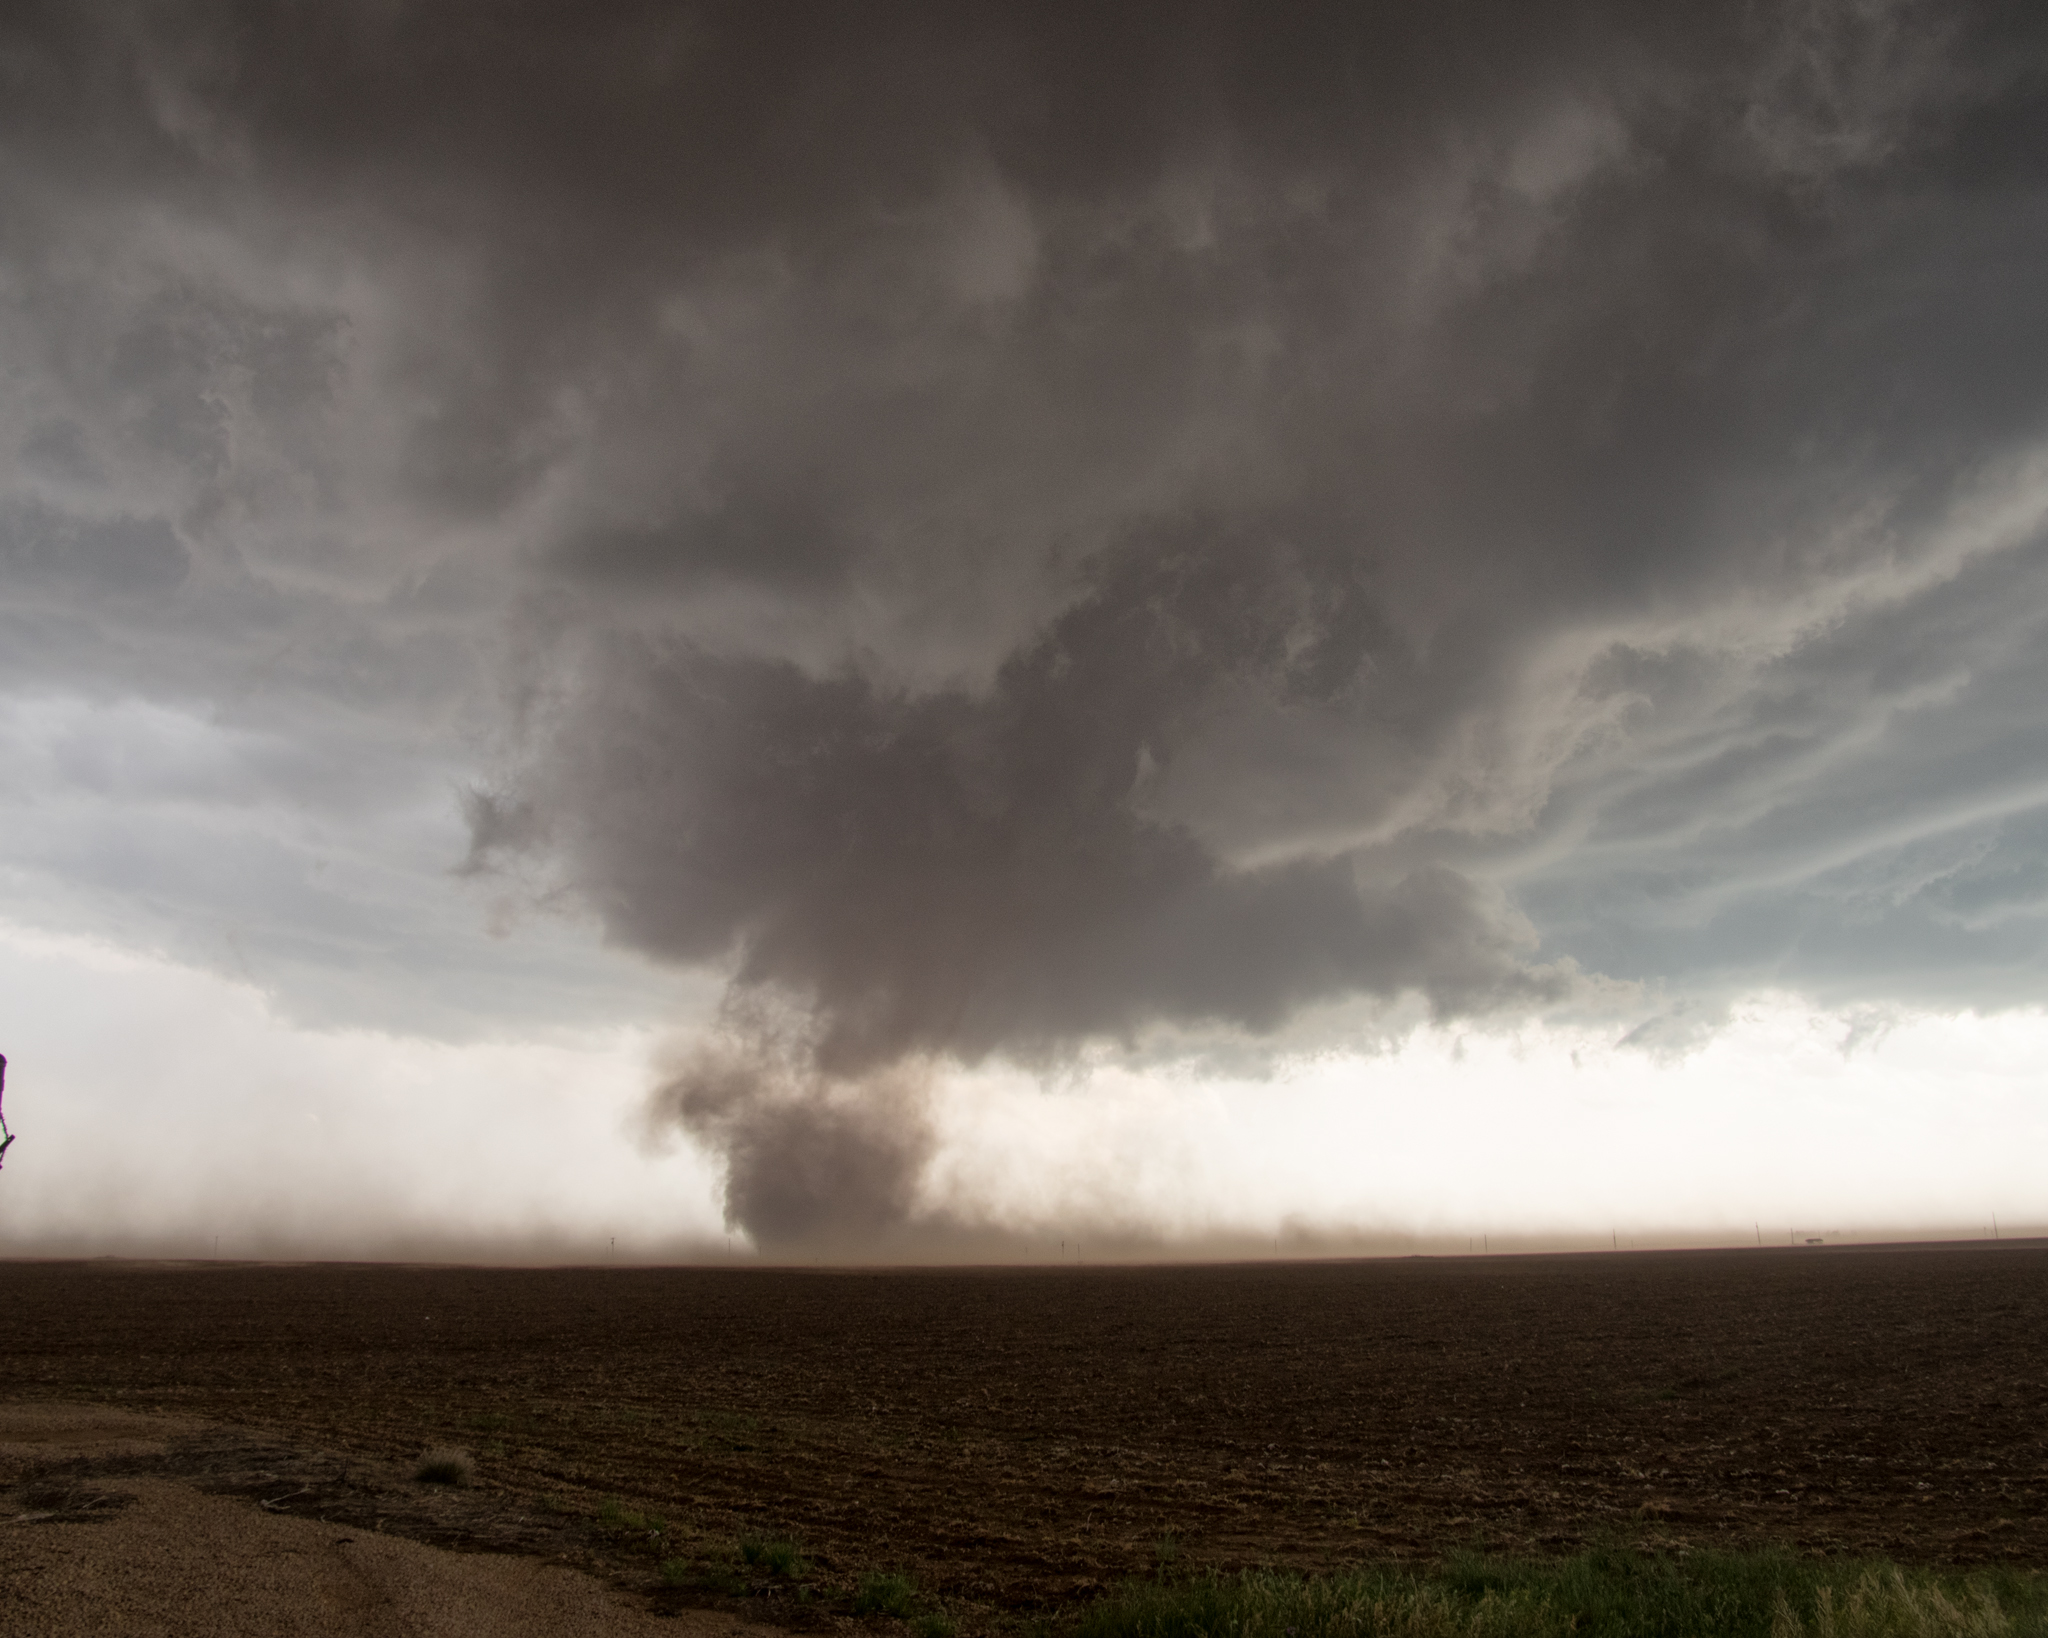 Evolution of the first tornado as it developed north of Tahoka on 5 May 2019. The picture was taken at 5:45 pm by Mark Conder.